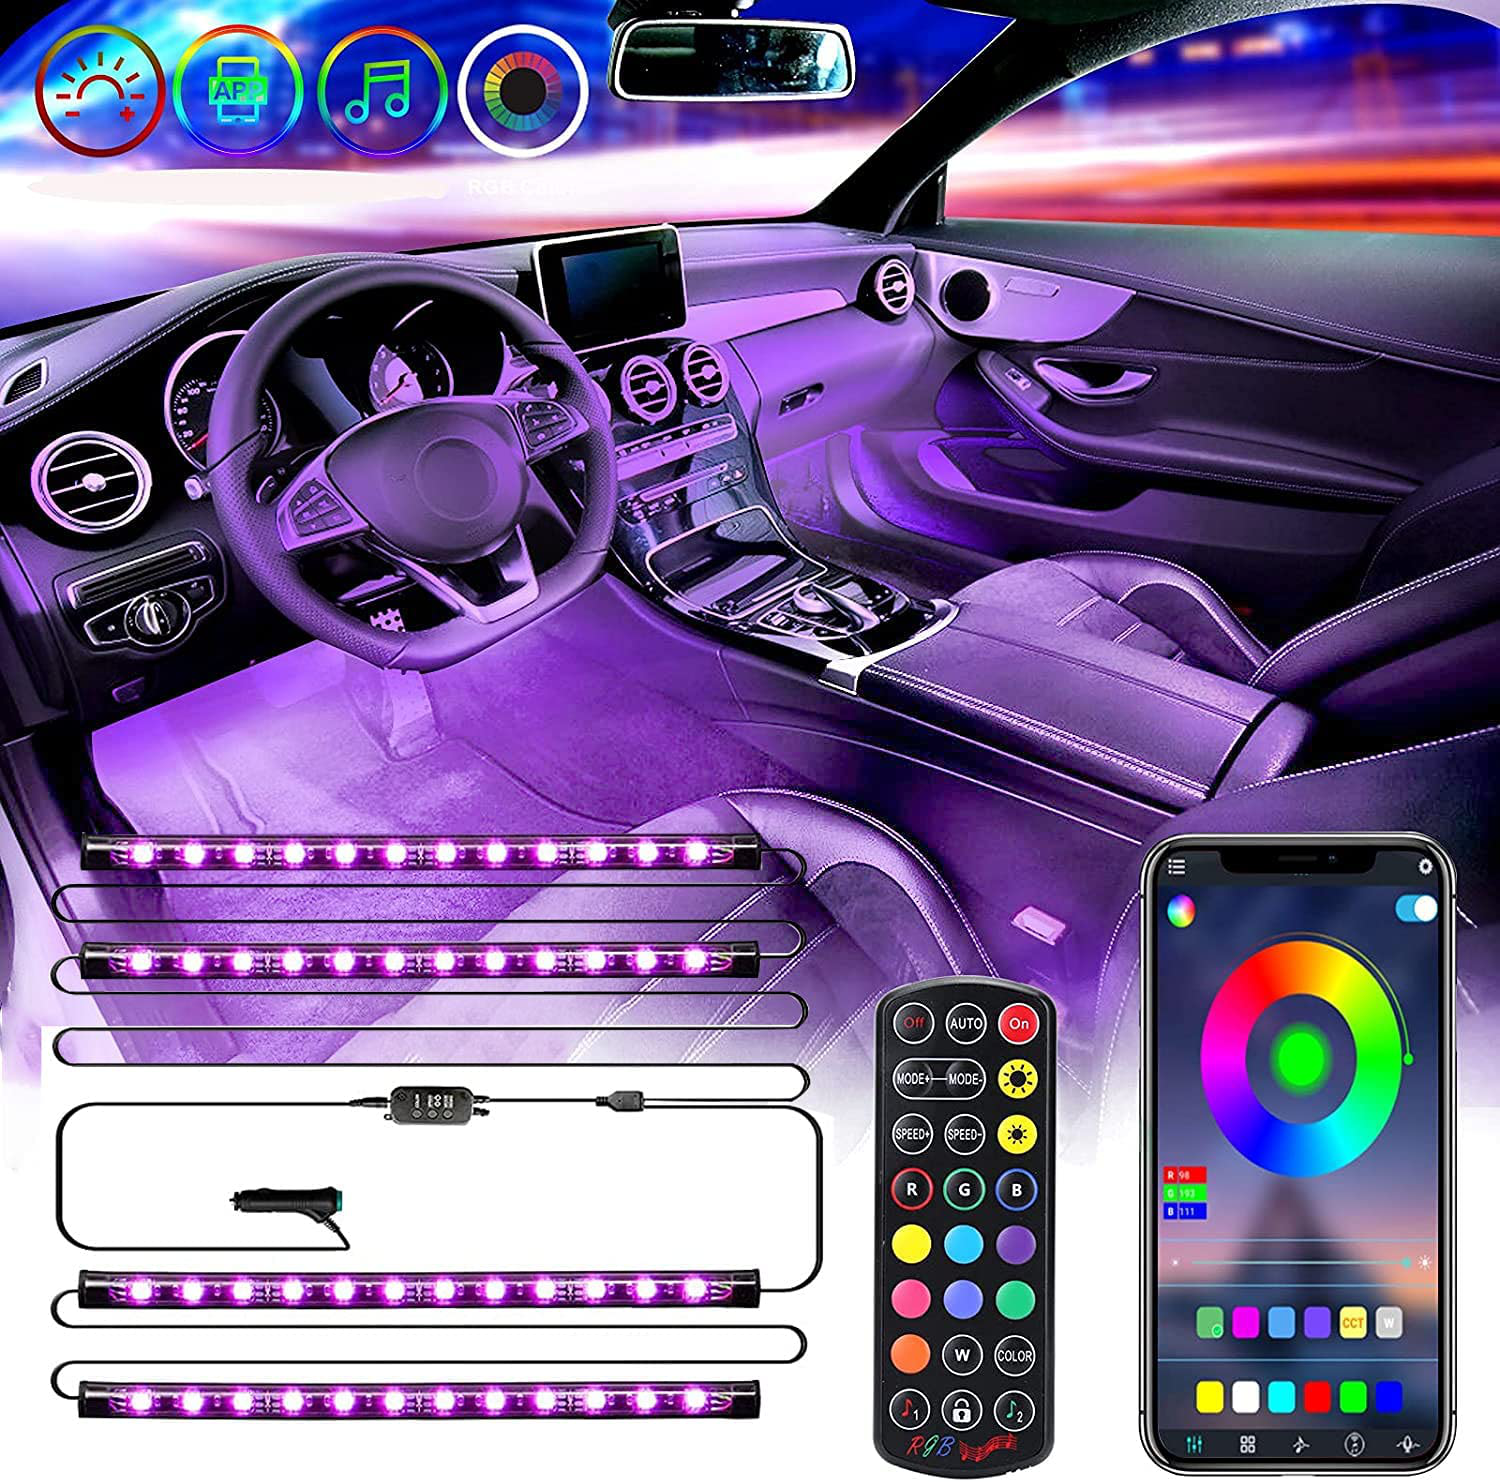 Interior Car Lights 2 Lines Design 16 Million Colors DIY Multicolor Music Sync Mode Car Lighting with APP Control and Remote Control led Light for car DC 12V